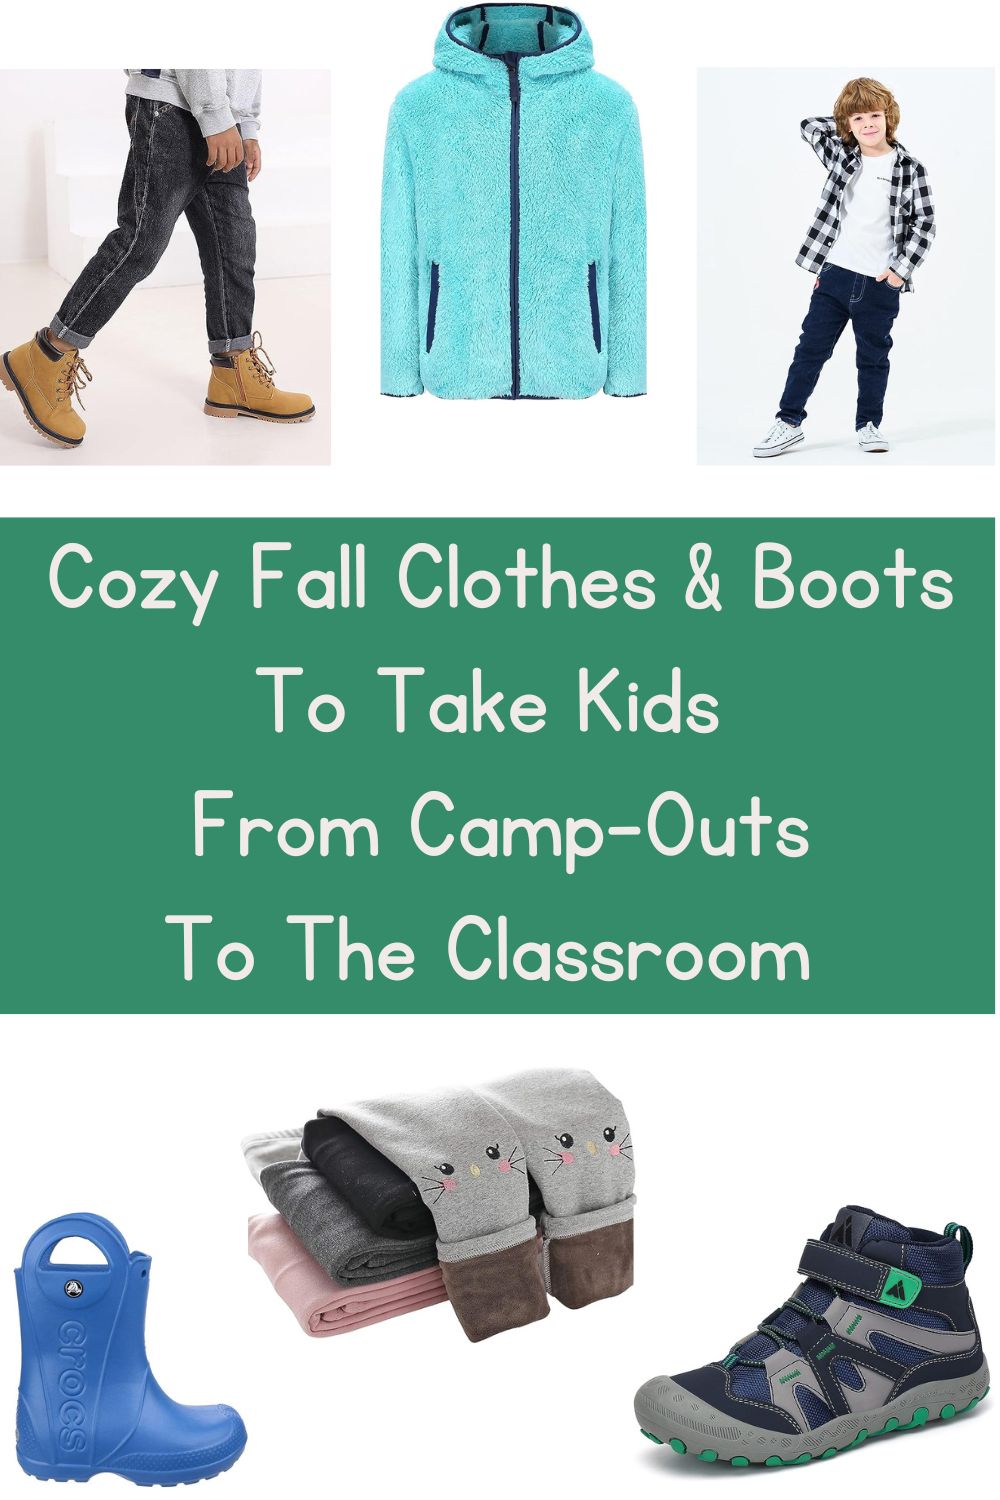 readers' picks and my teen's favorites: kids fall boots, clothes and accessories that will keep them warm outdoors on weekends and comfortable at school, too.